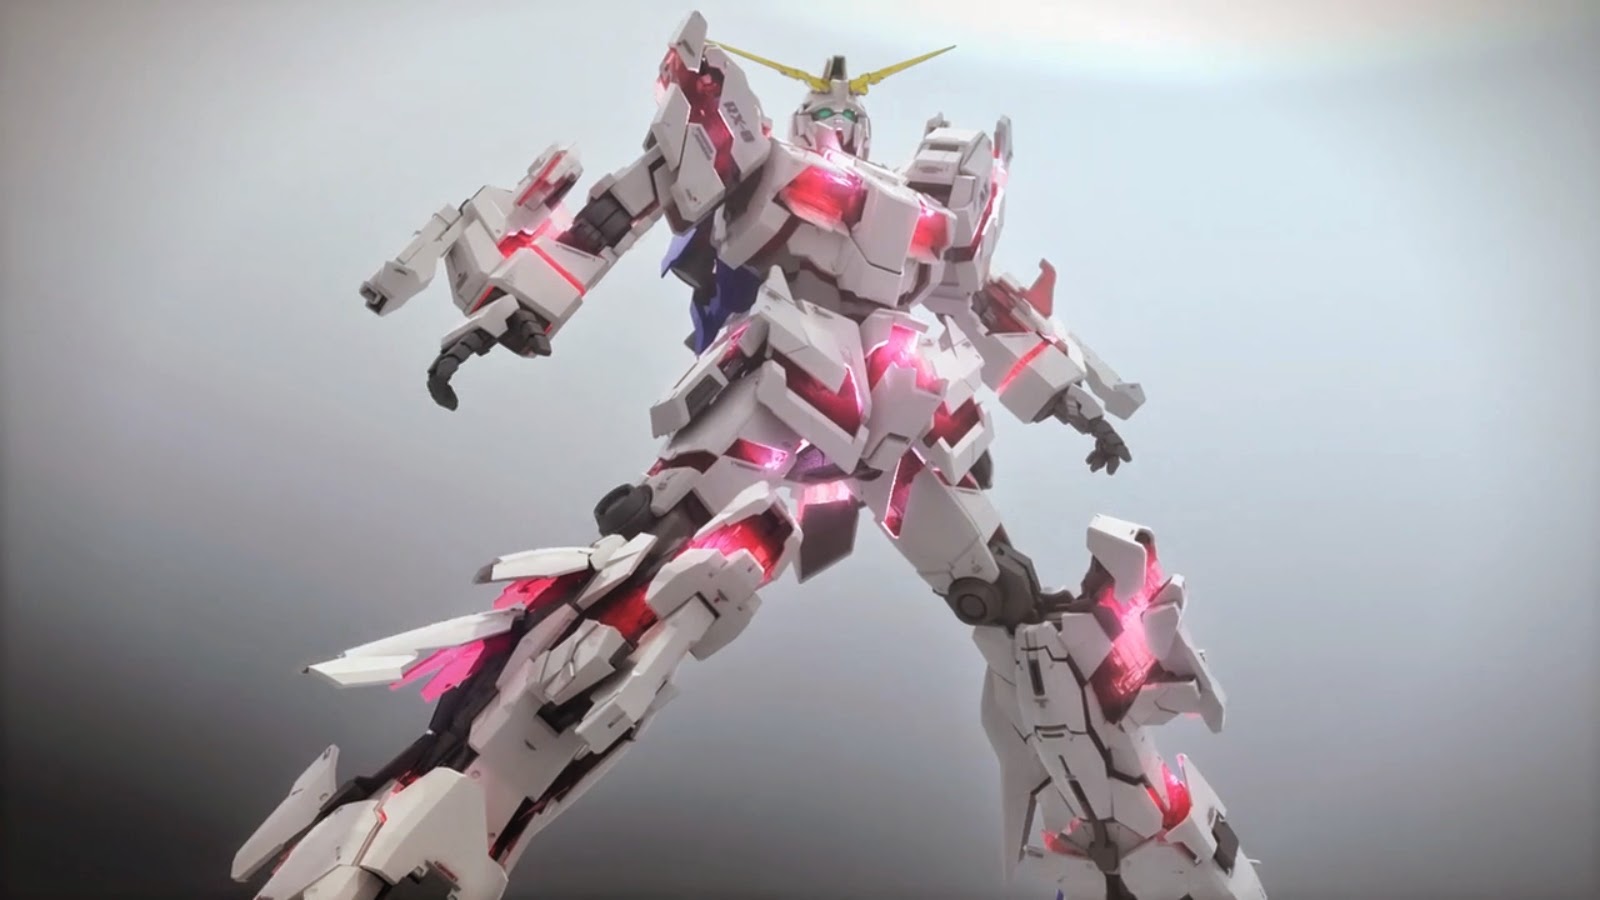 PG 1/60 RX-0 Unicorn Gundam - Release Info, Box Art and Official Images